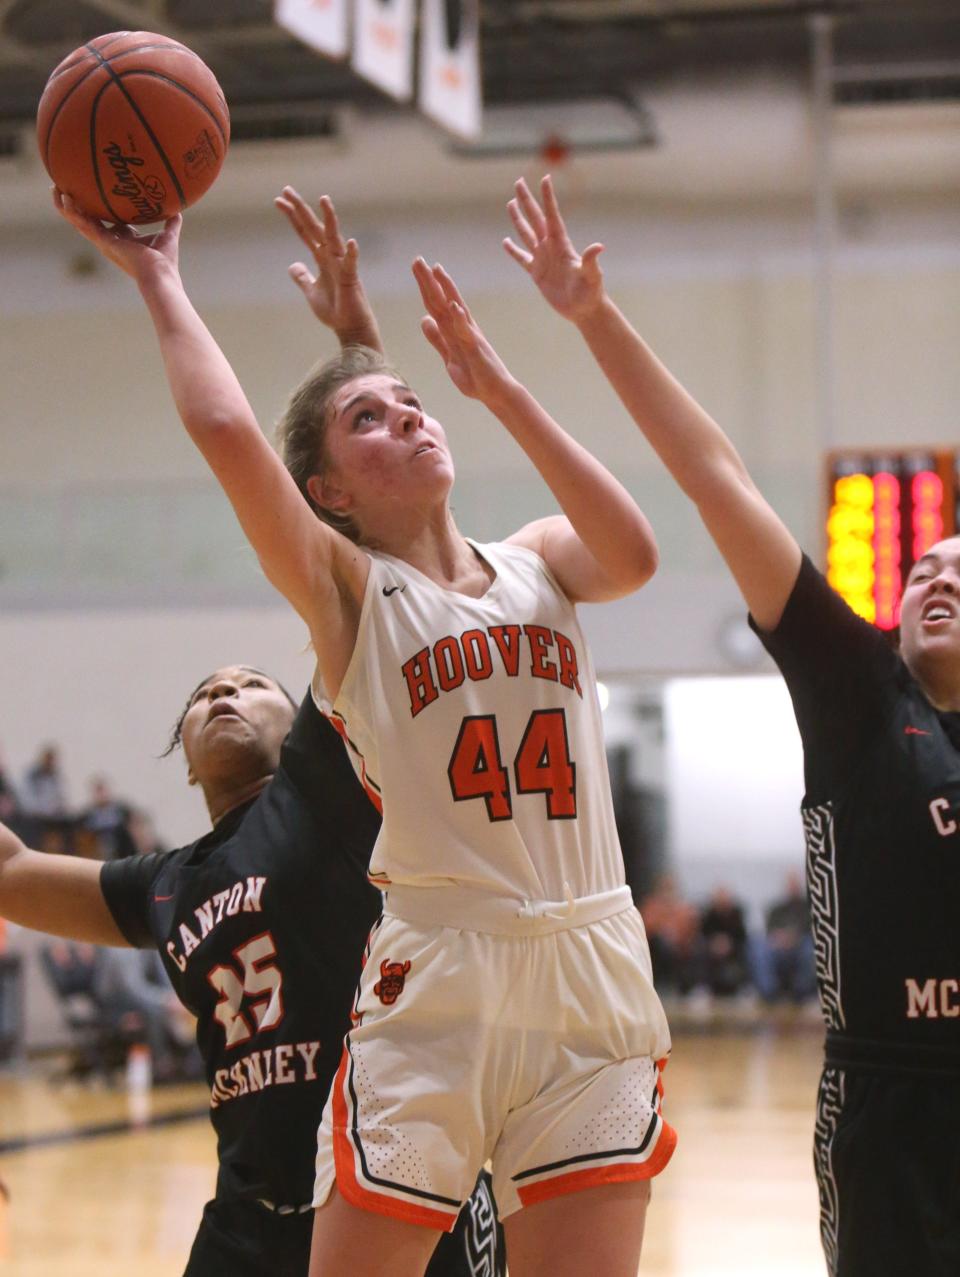 Hoover's Grace Craig (44), shown here during a game last season, led the Vikings to a convincing win over Garfield in Friday's season opener.